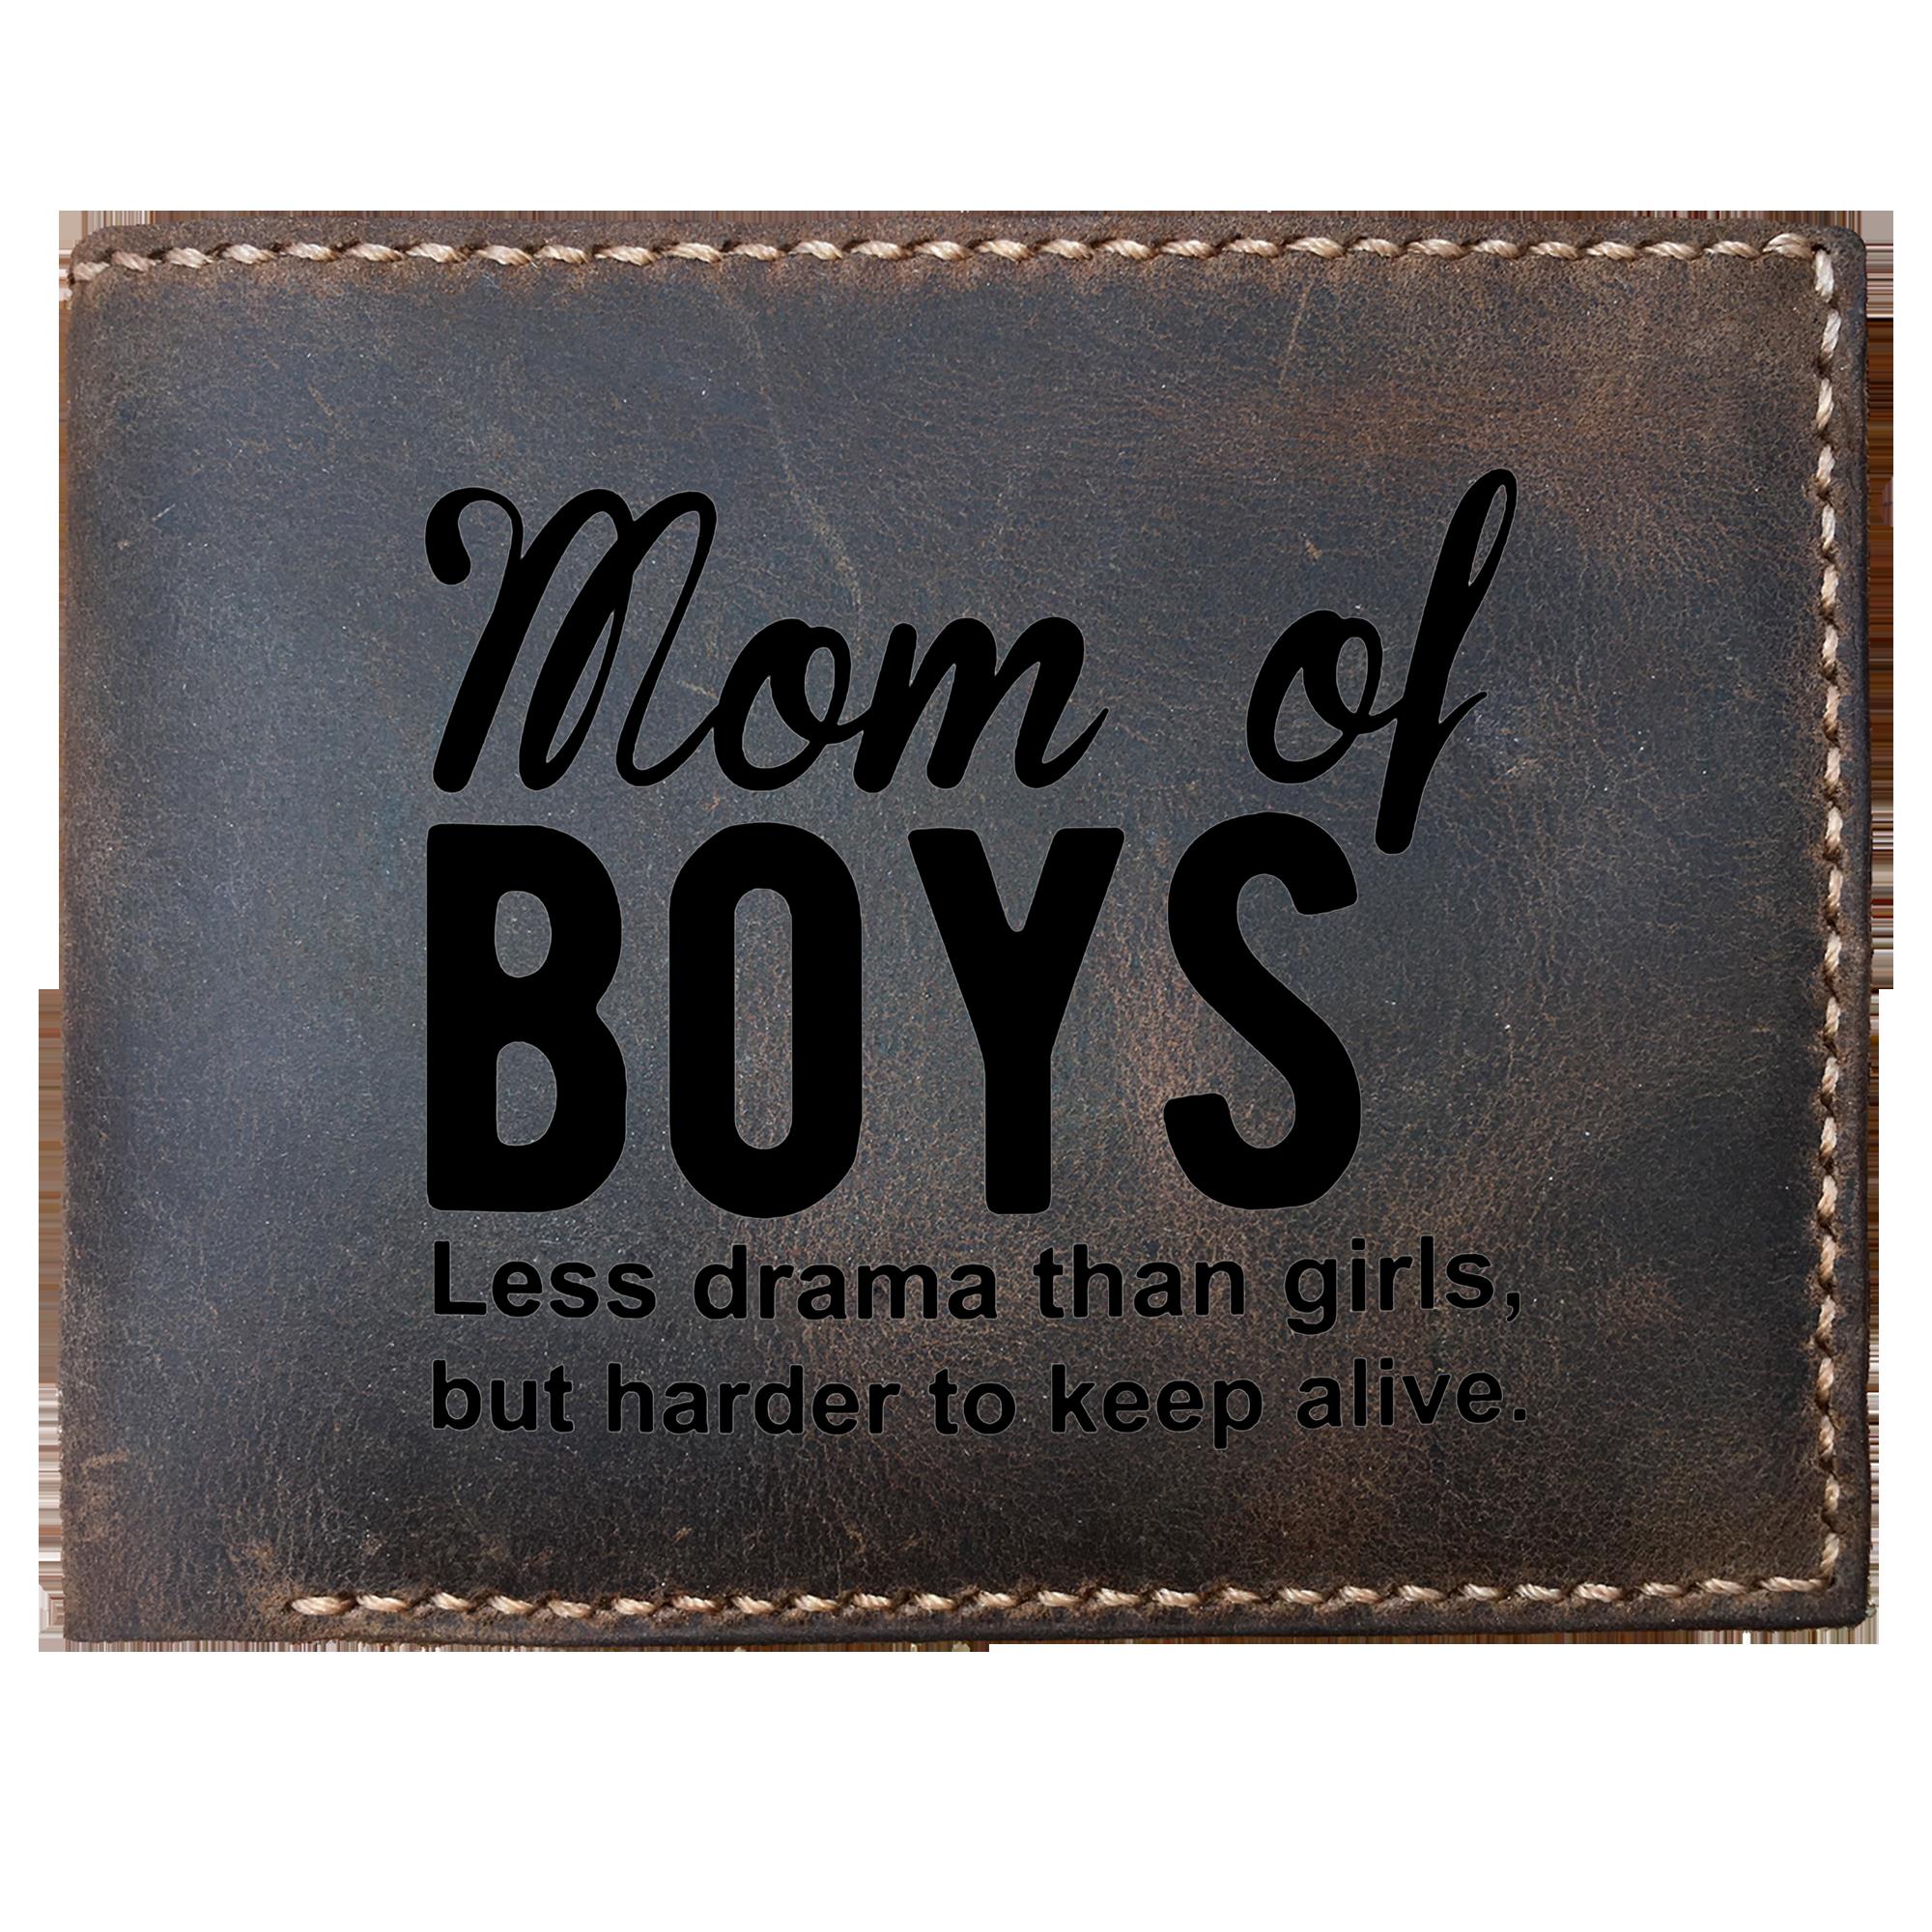 Skitongifts Funny Custom Laser Engraved Bifold Leather Wallet For Men, Mom Of Boys Less Drama Than Girls But Harder To Keep Alive - Copy